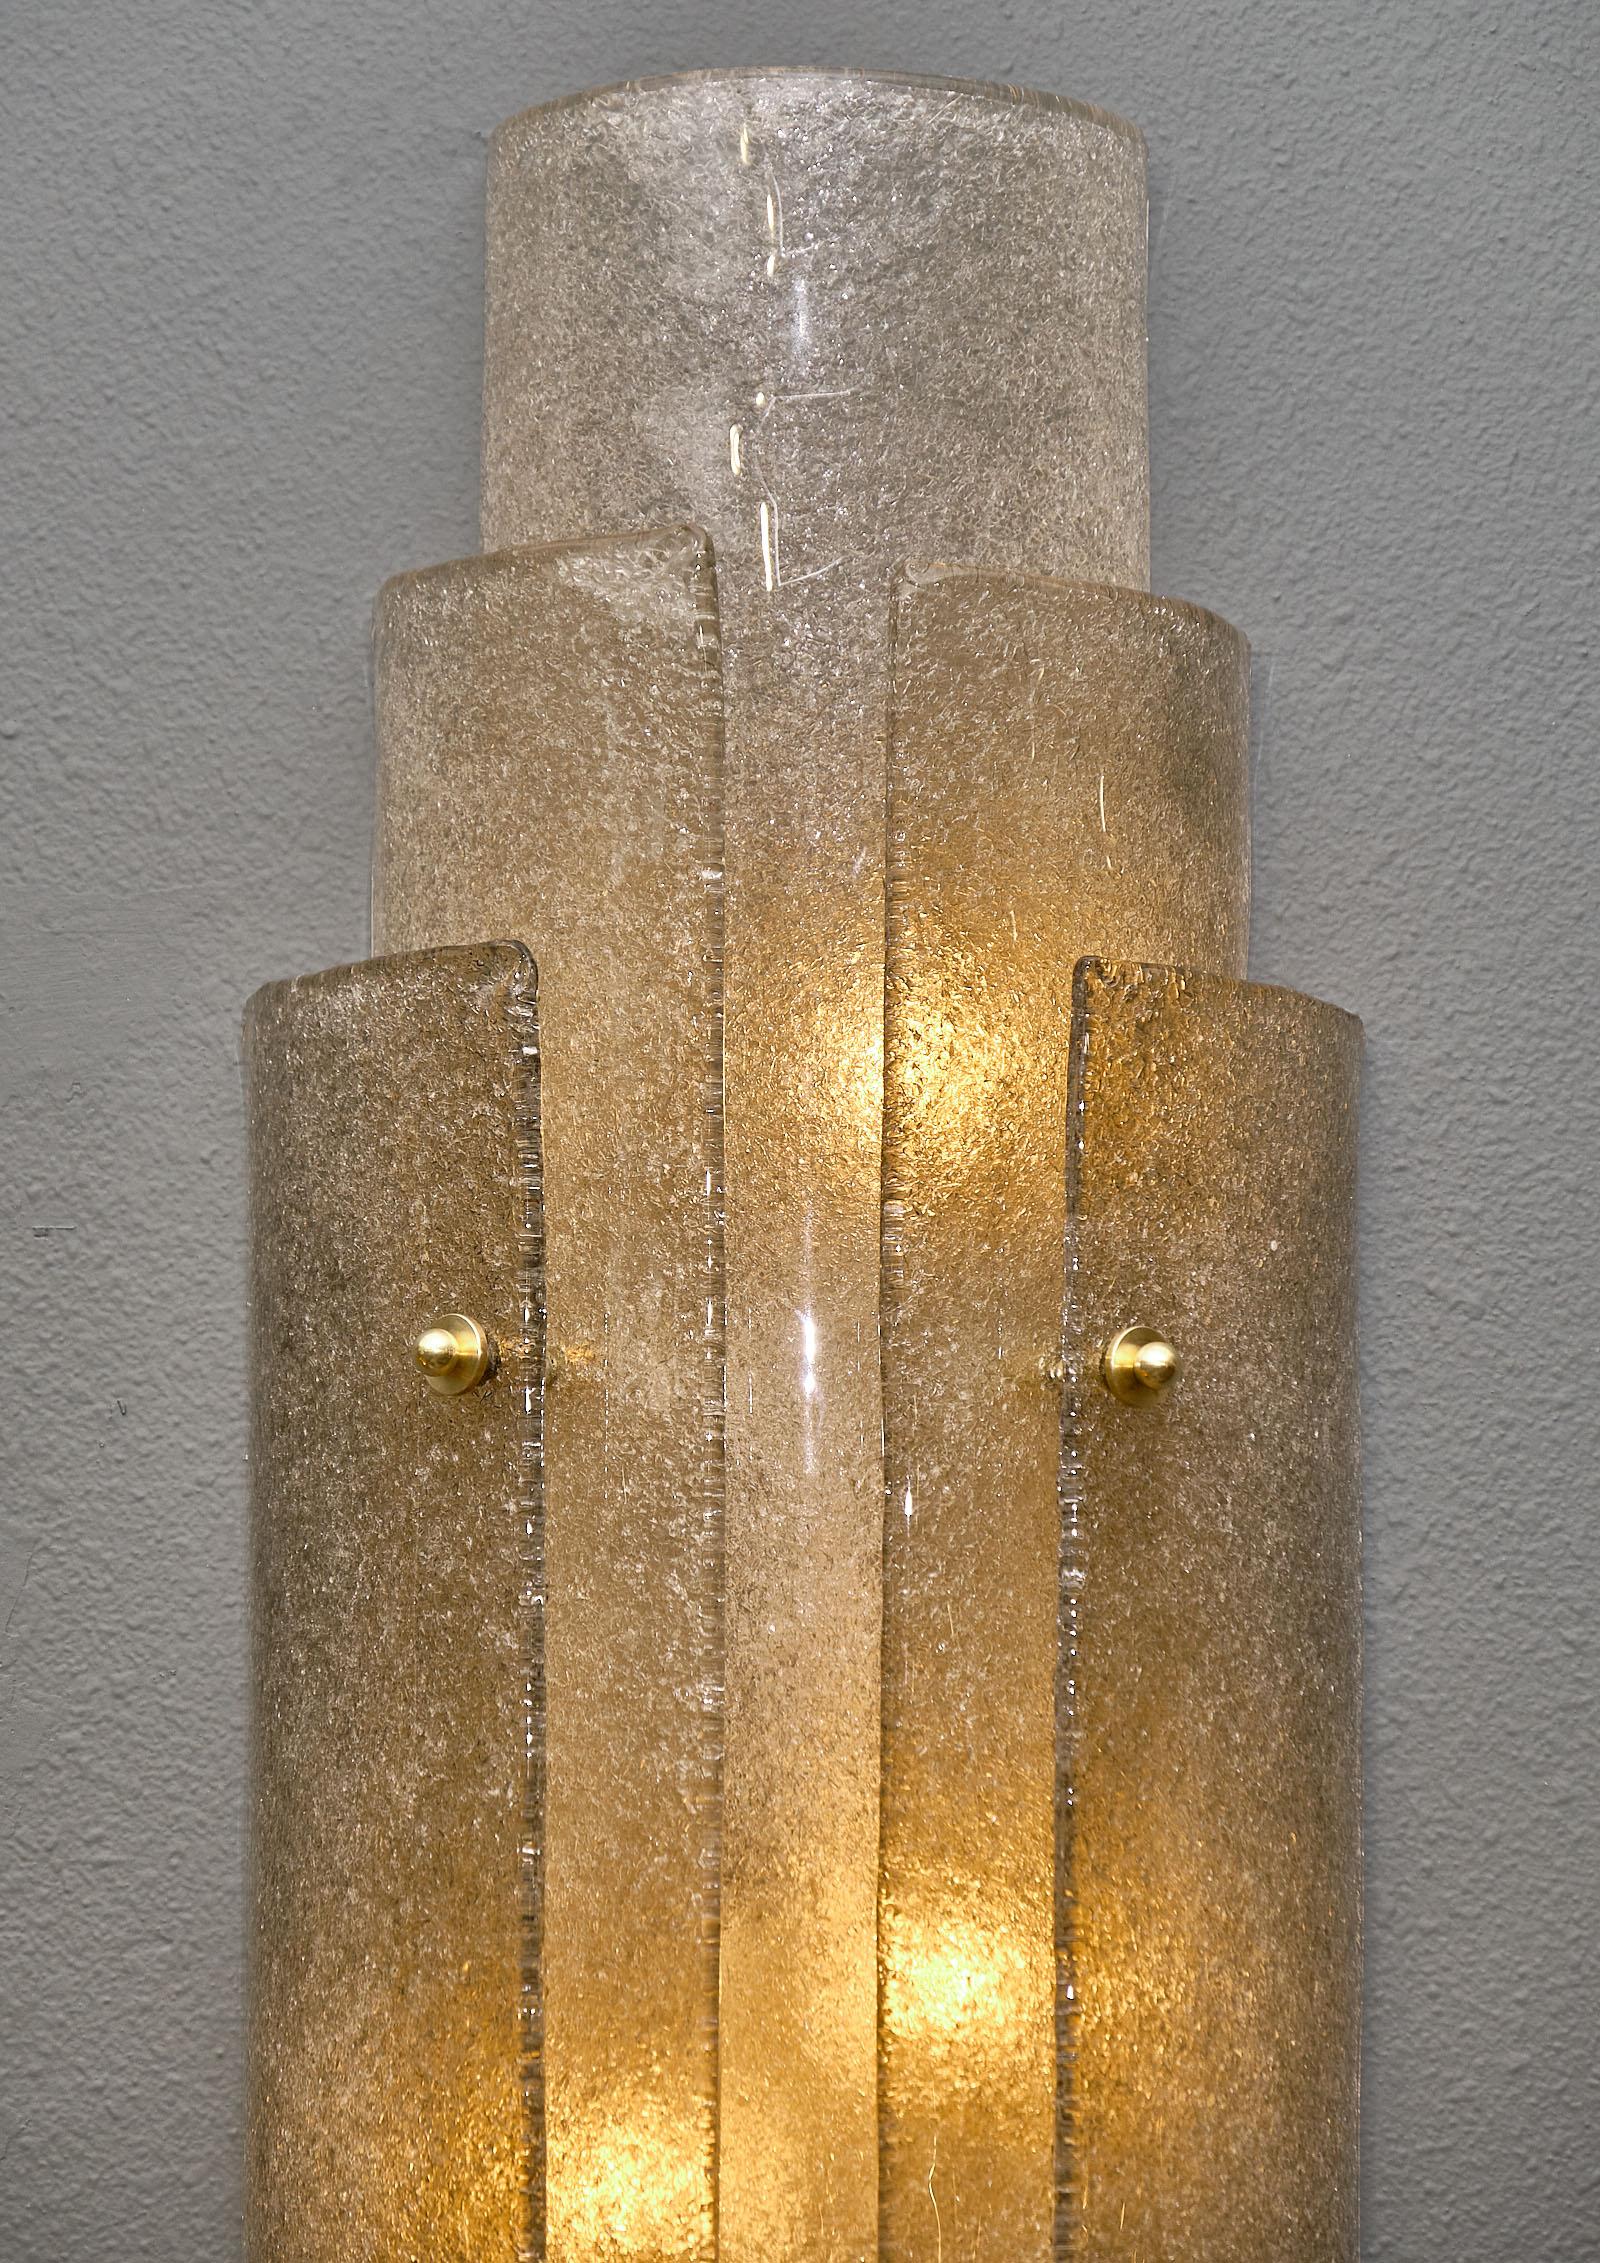 Large Murano “Graniglia” glass sconces in a monumental size featuring three layers of clear and smoked graniglia glass. We love the texture of the pieces, as well as the Art Deco feel. The impressive size gives these sconces great decorative impact.